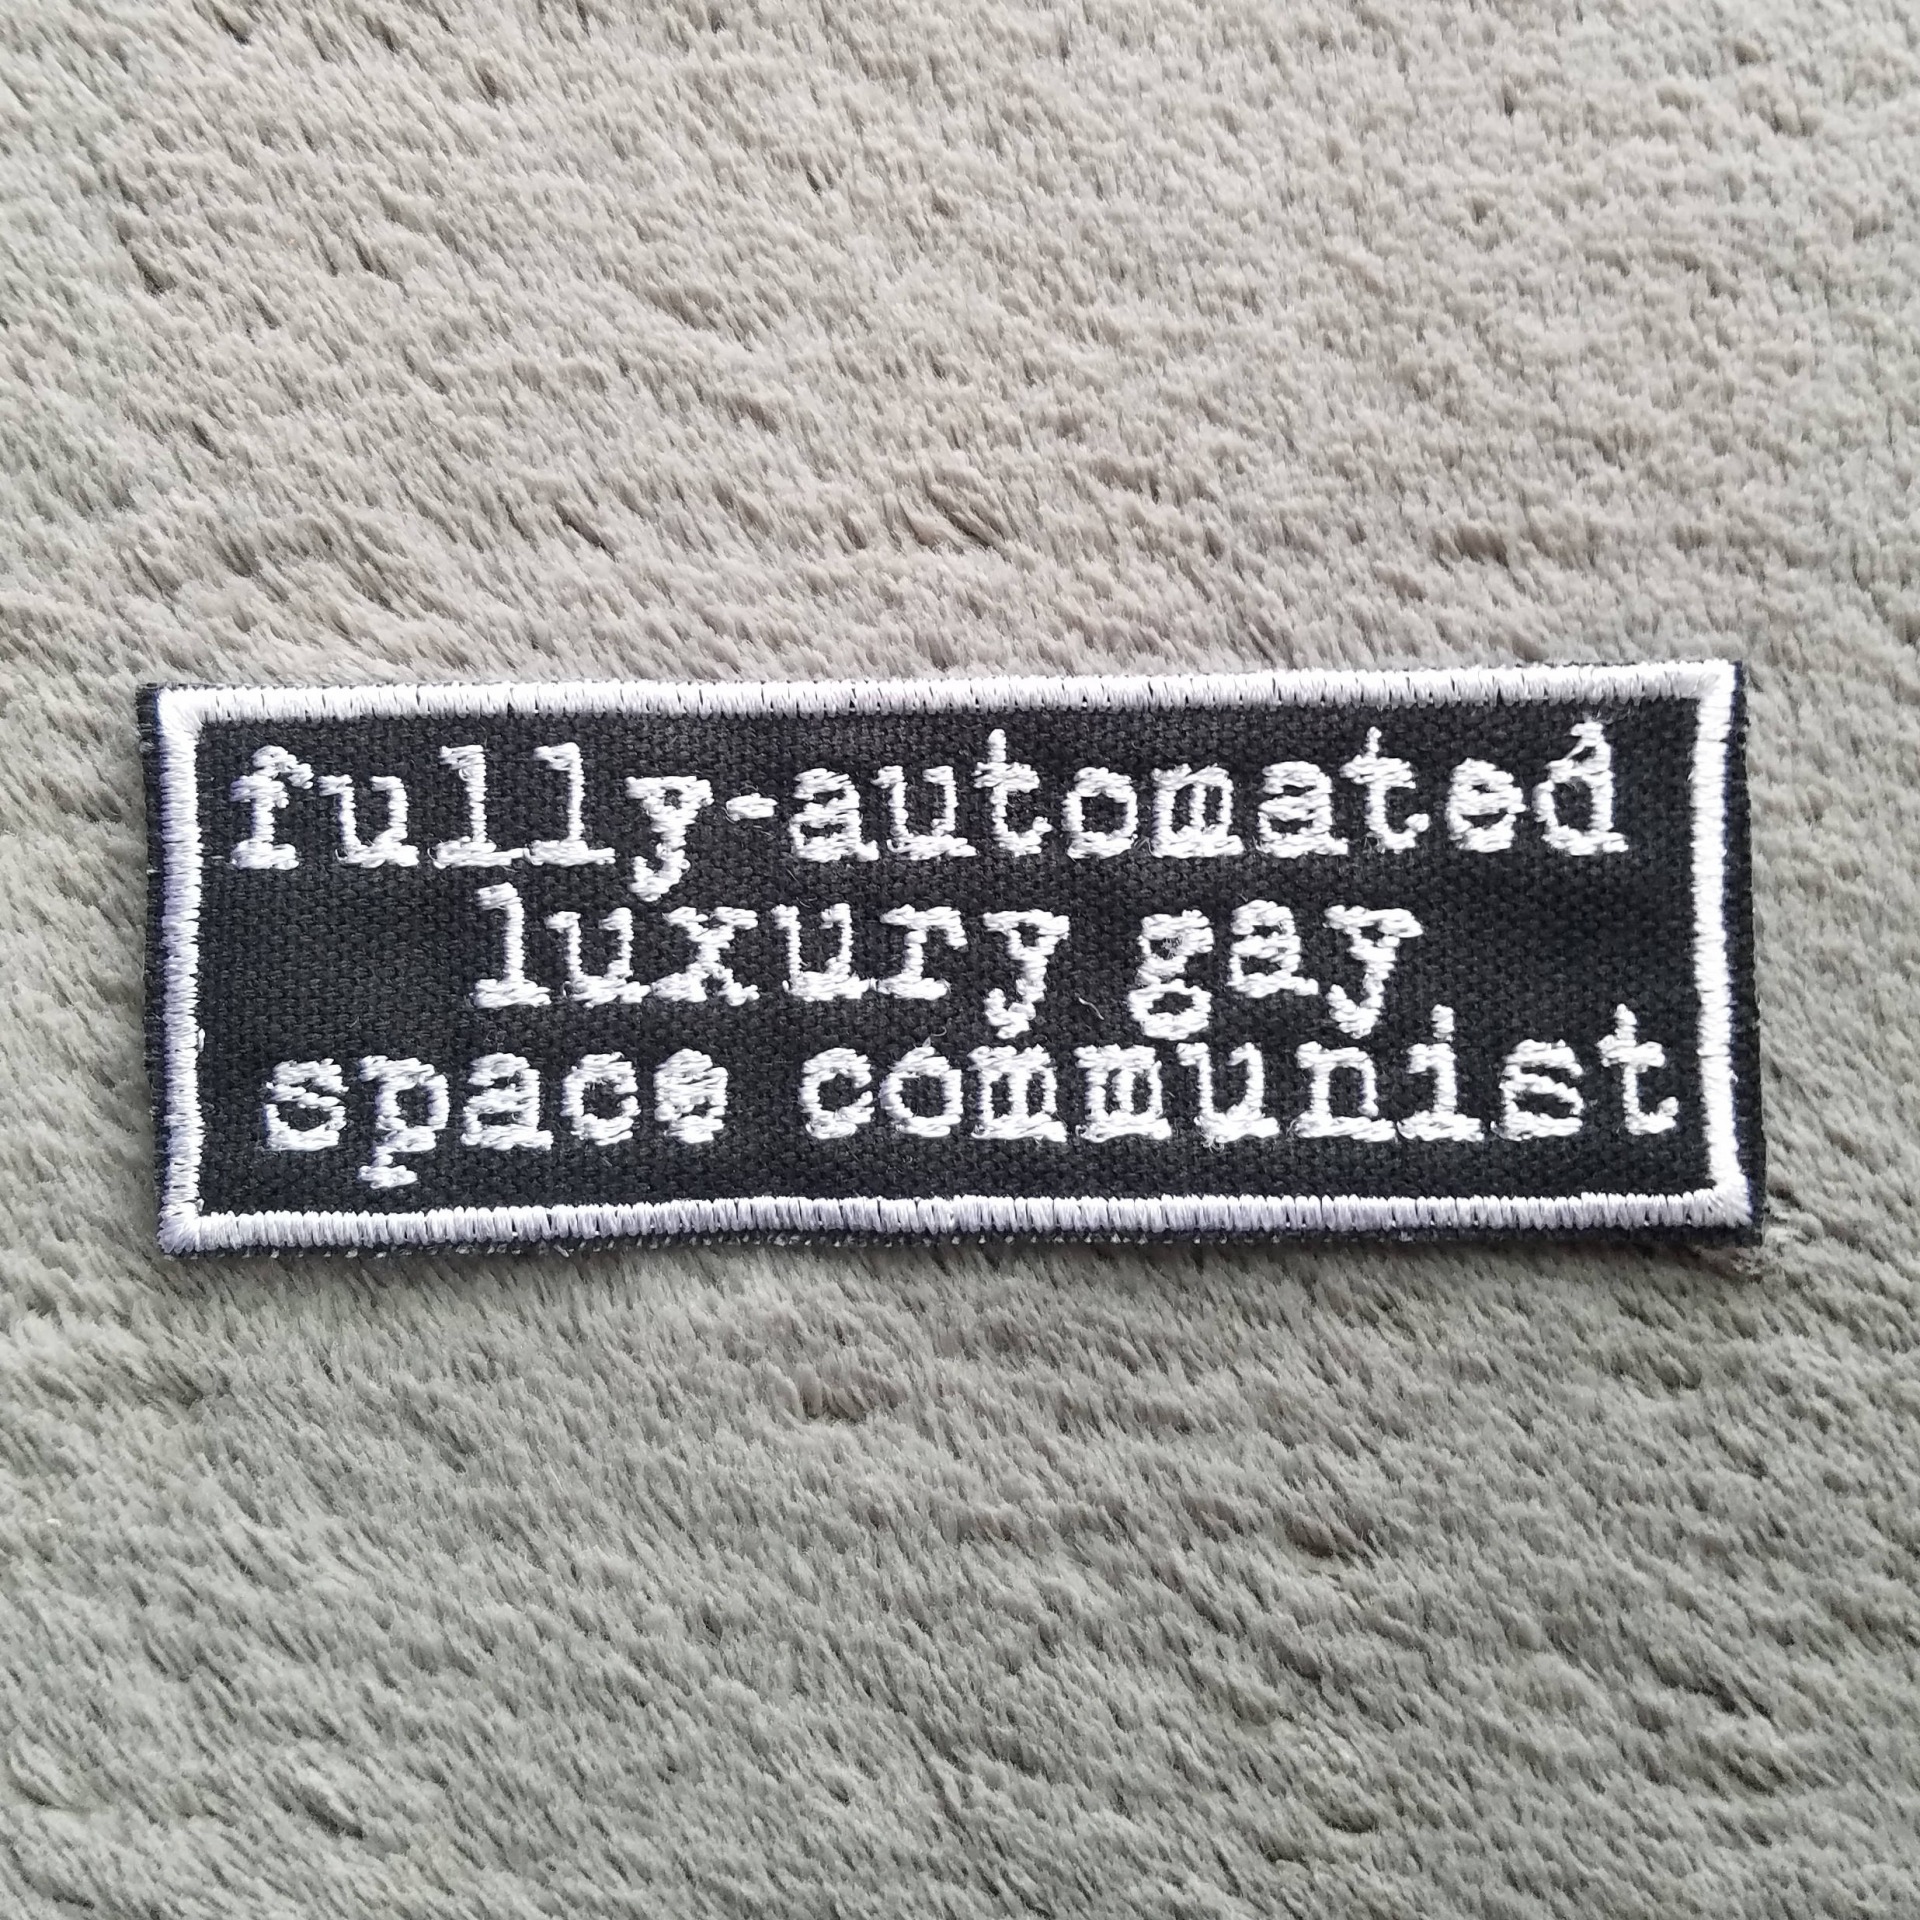 Fully automated luxury gay space communist Blank Meme Template